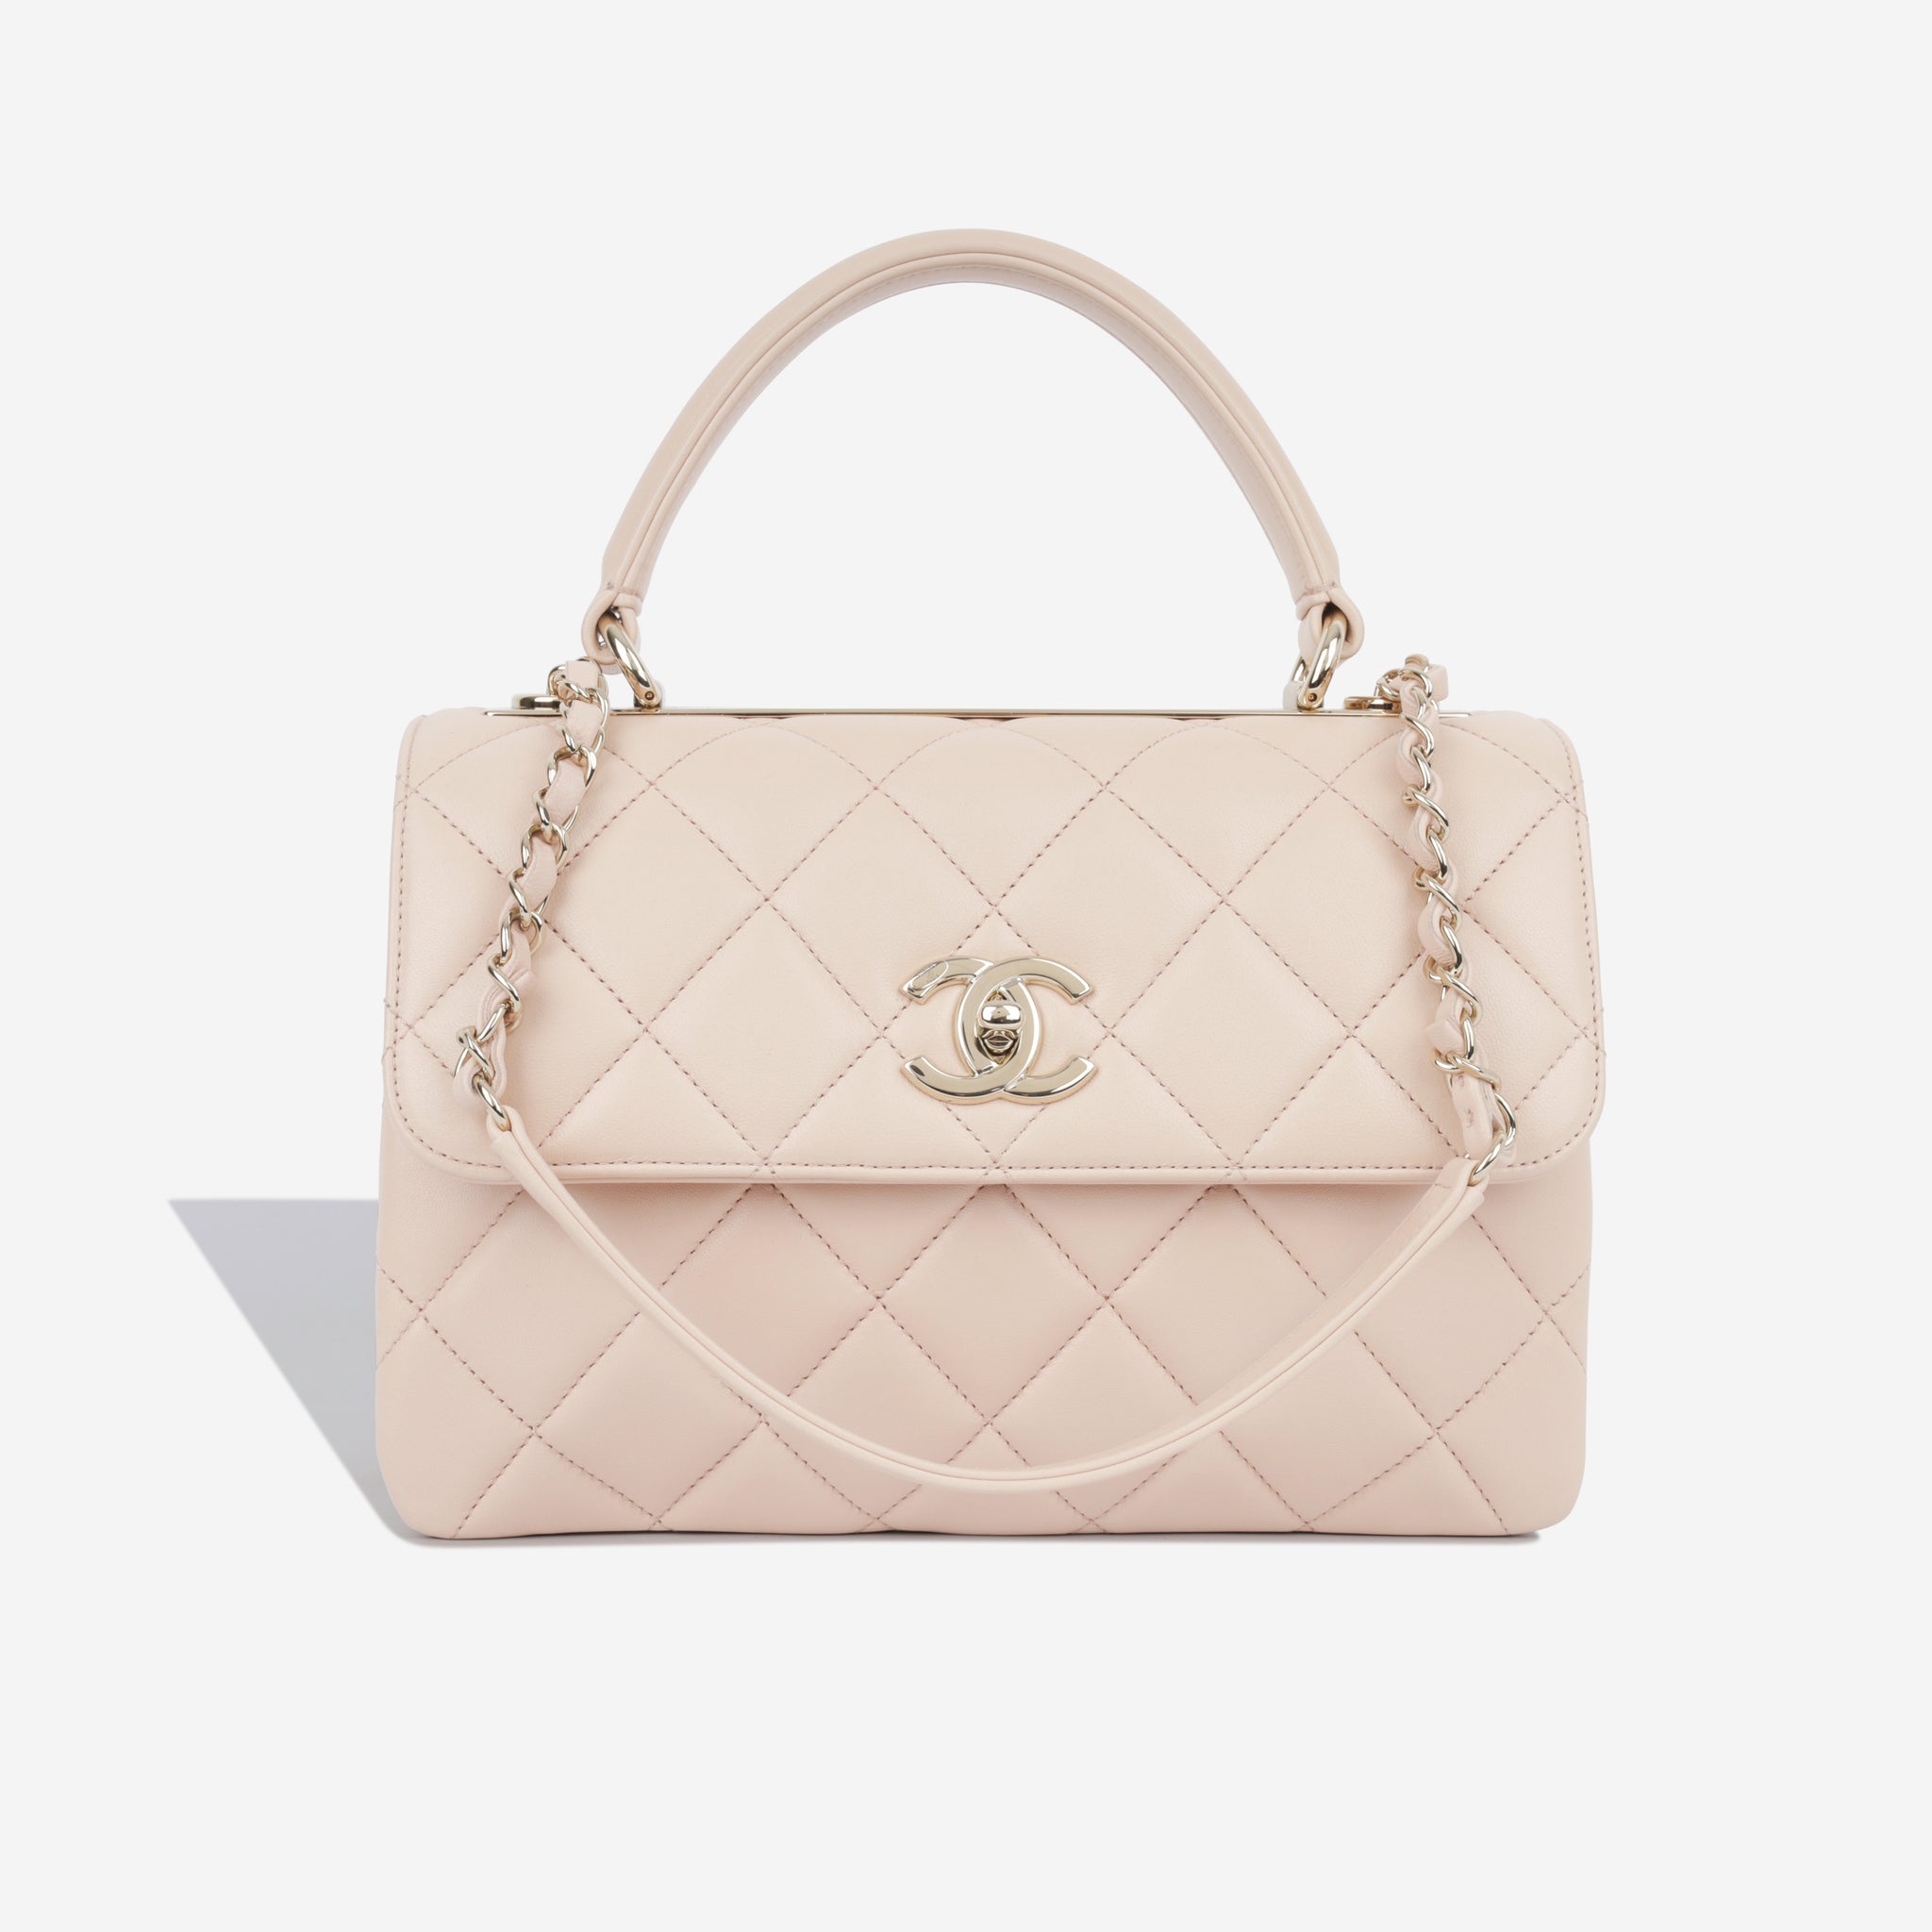 Chanel - Trendy CC Flap Bag Small - Pink Lambskin - CGHW - Excellent